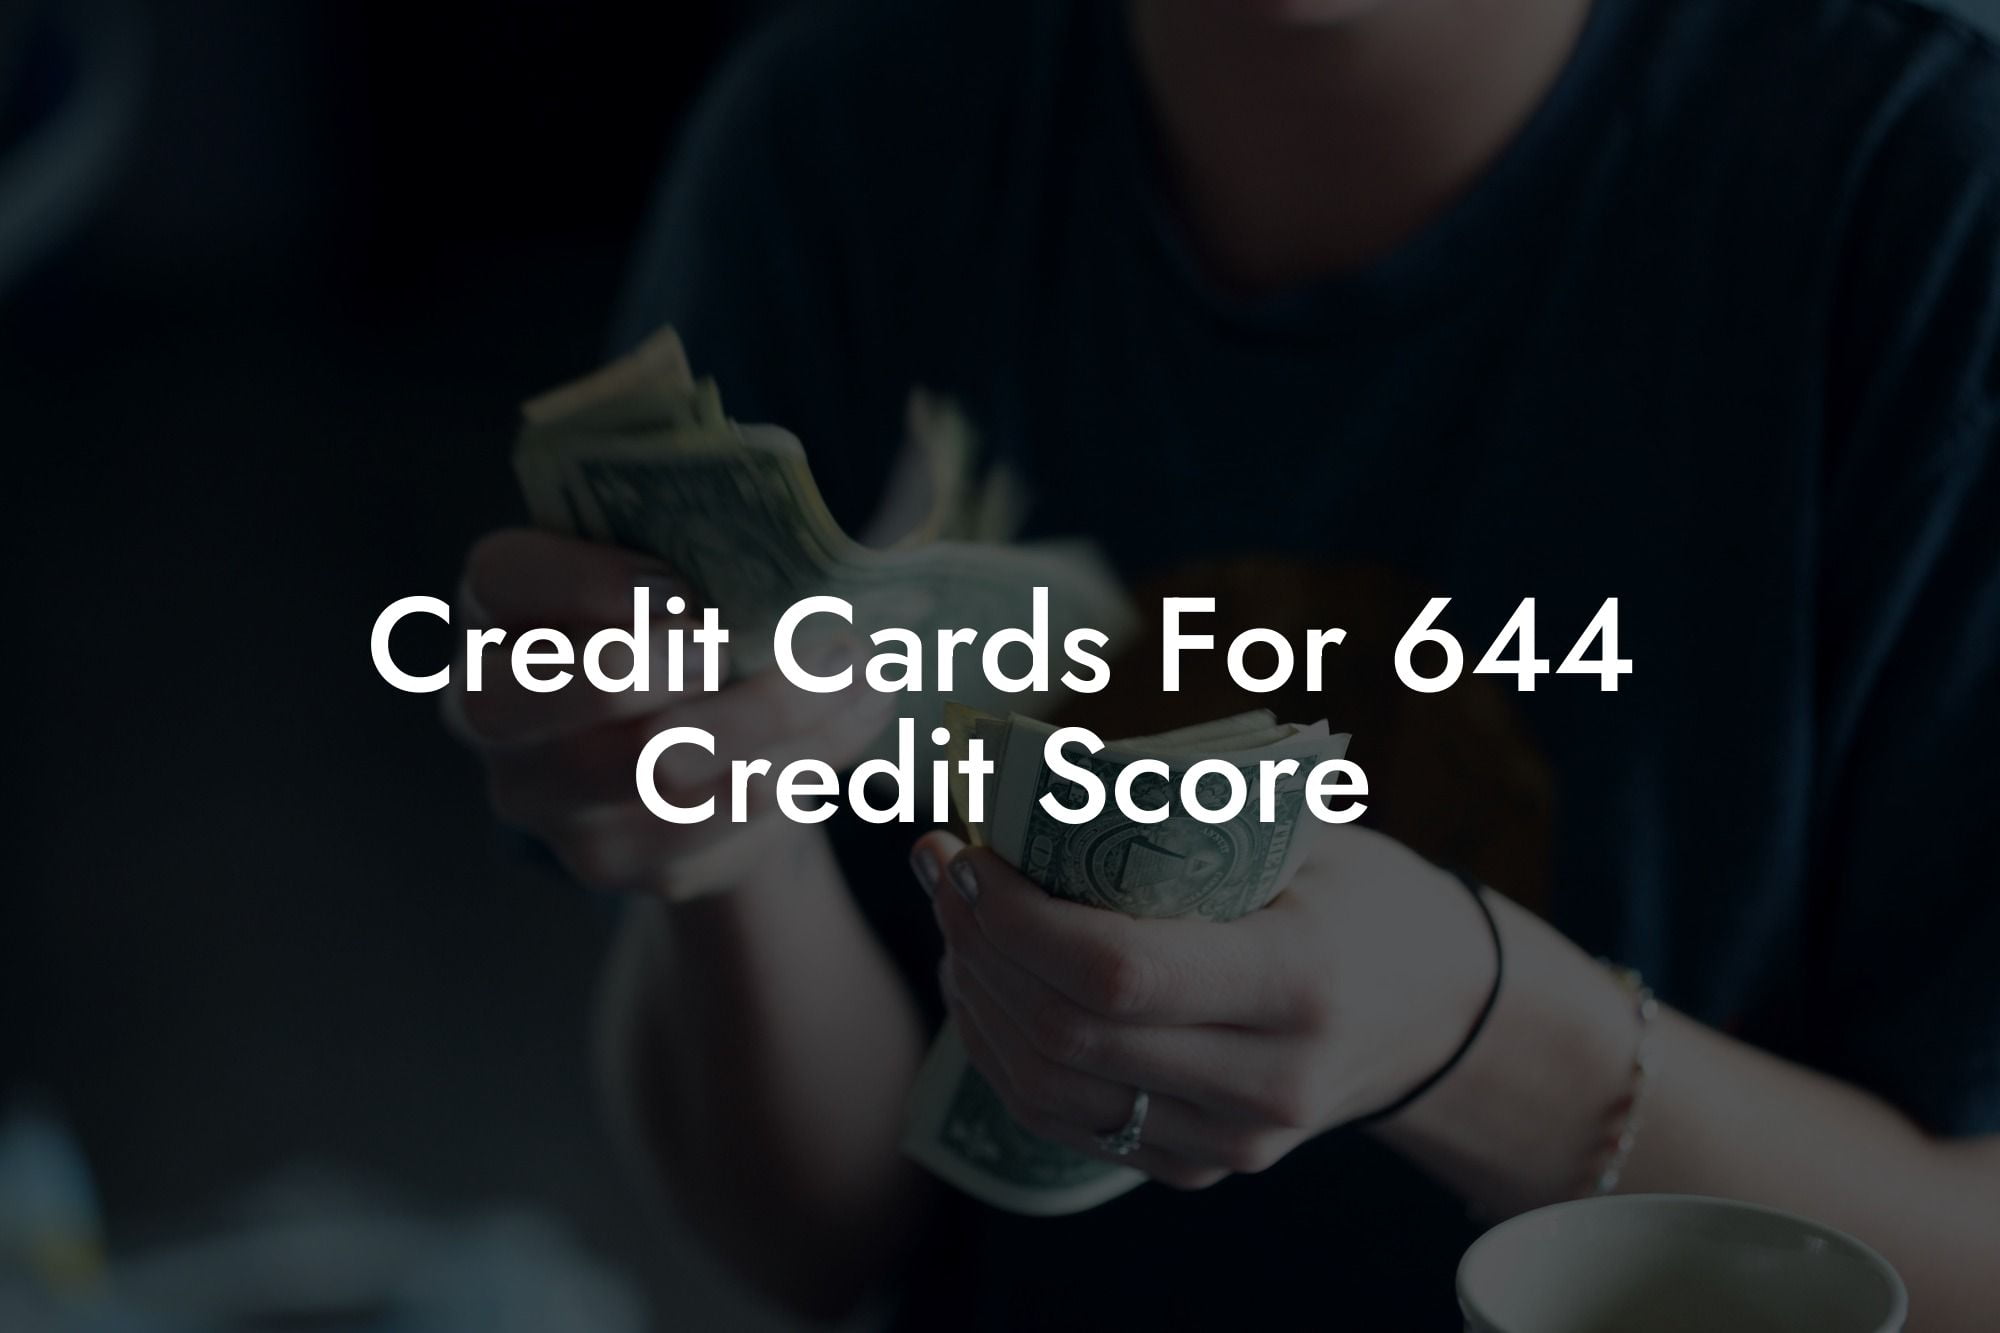 Credit Cards For 644 Credit Score